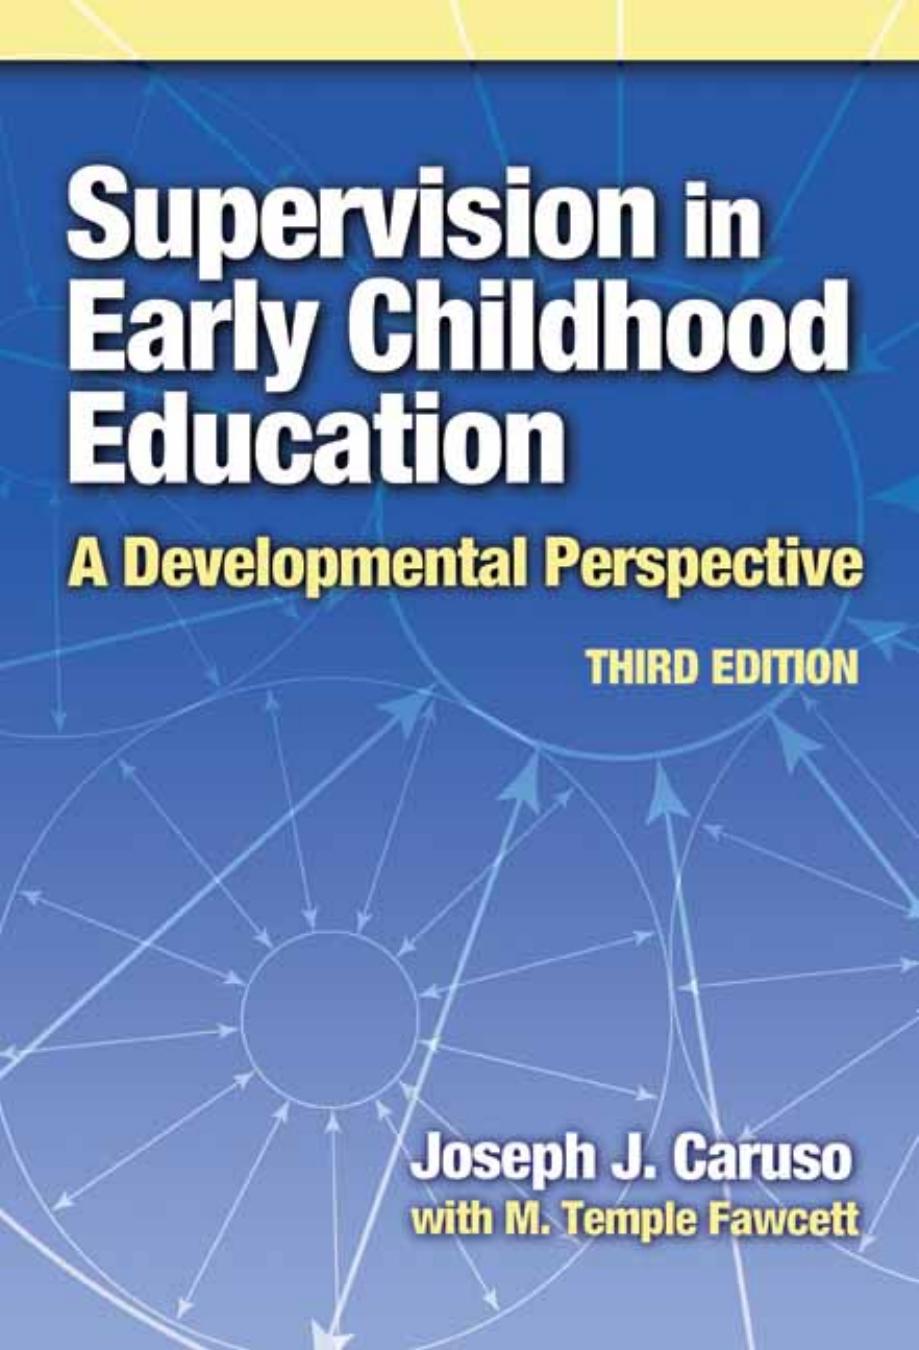 Supervision in Early Childhood Education  A Developmental Perspective 3rd ed. 2007.pdf